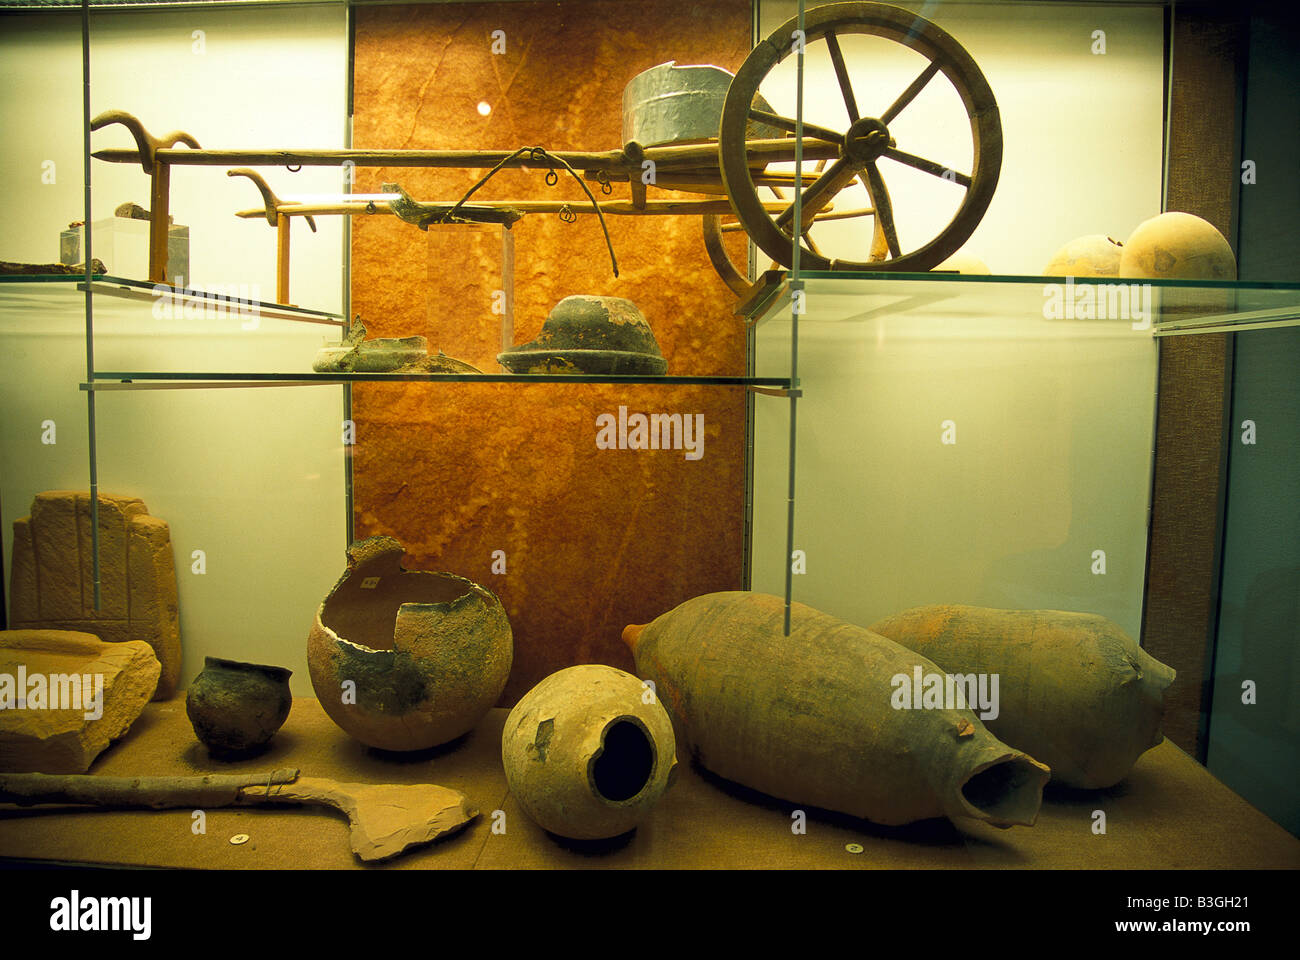 Amphorae and other remains dating to the Garamantes Kingdom on display at the Tripoli Museum, Tripoli, Libya. Stock Photo